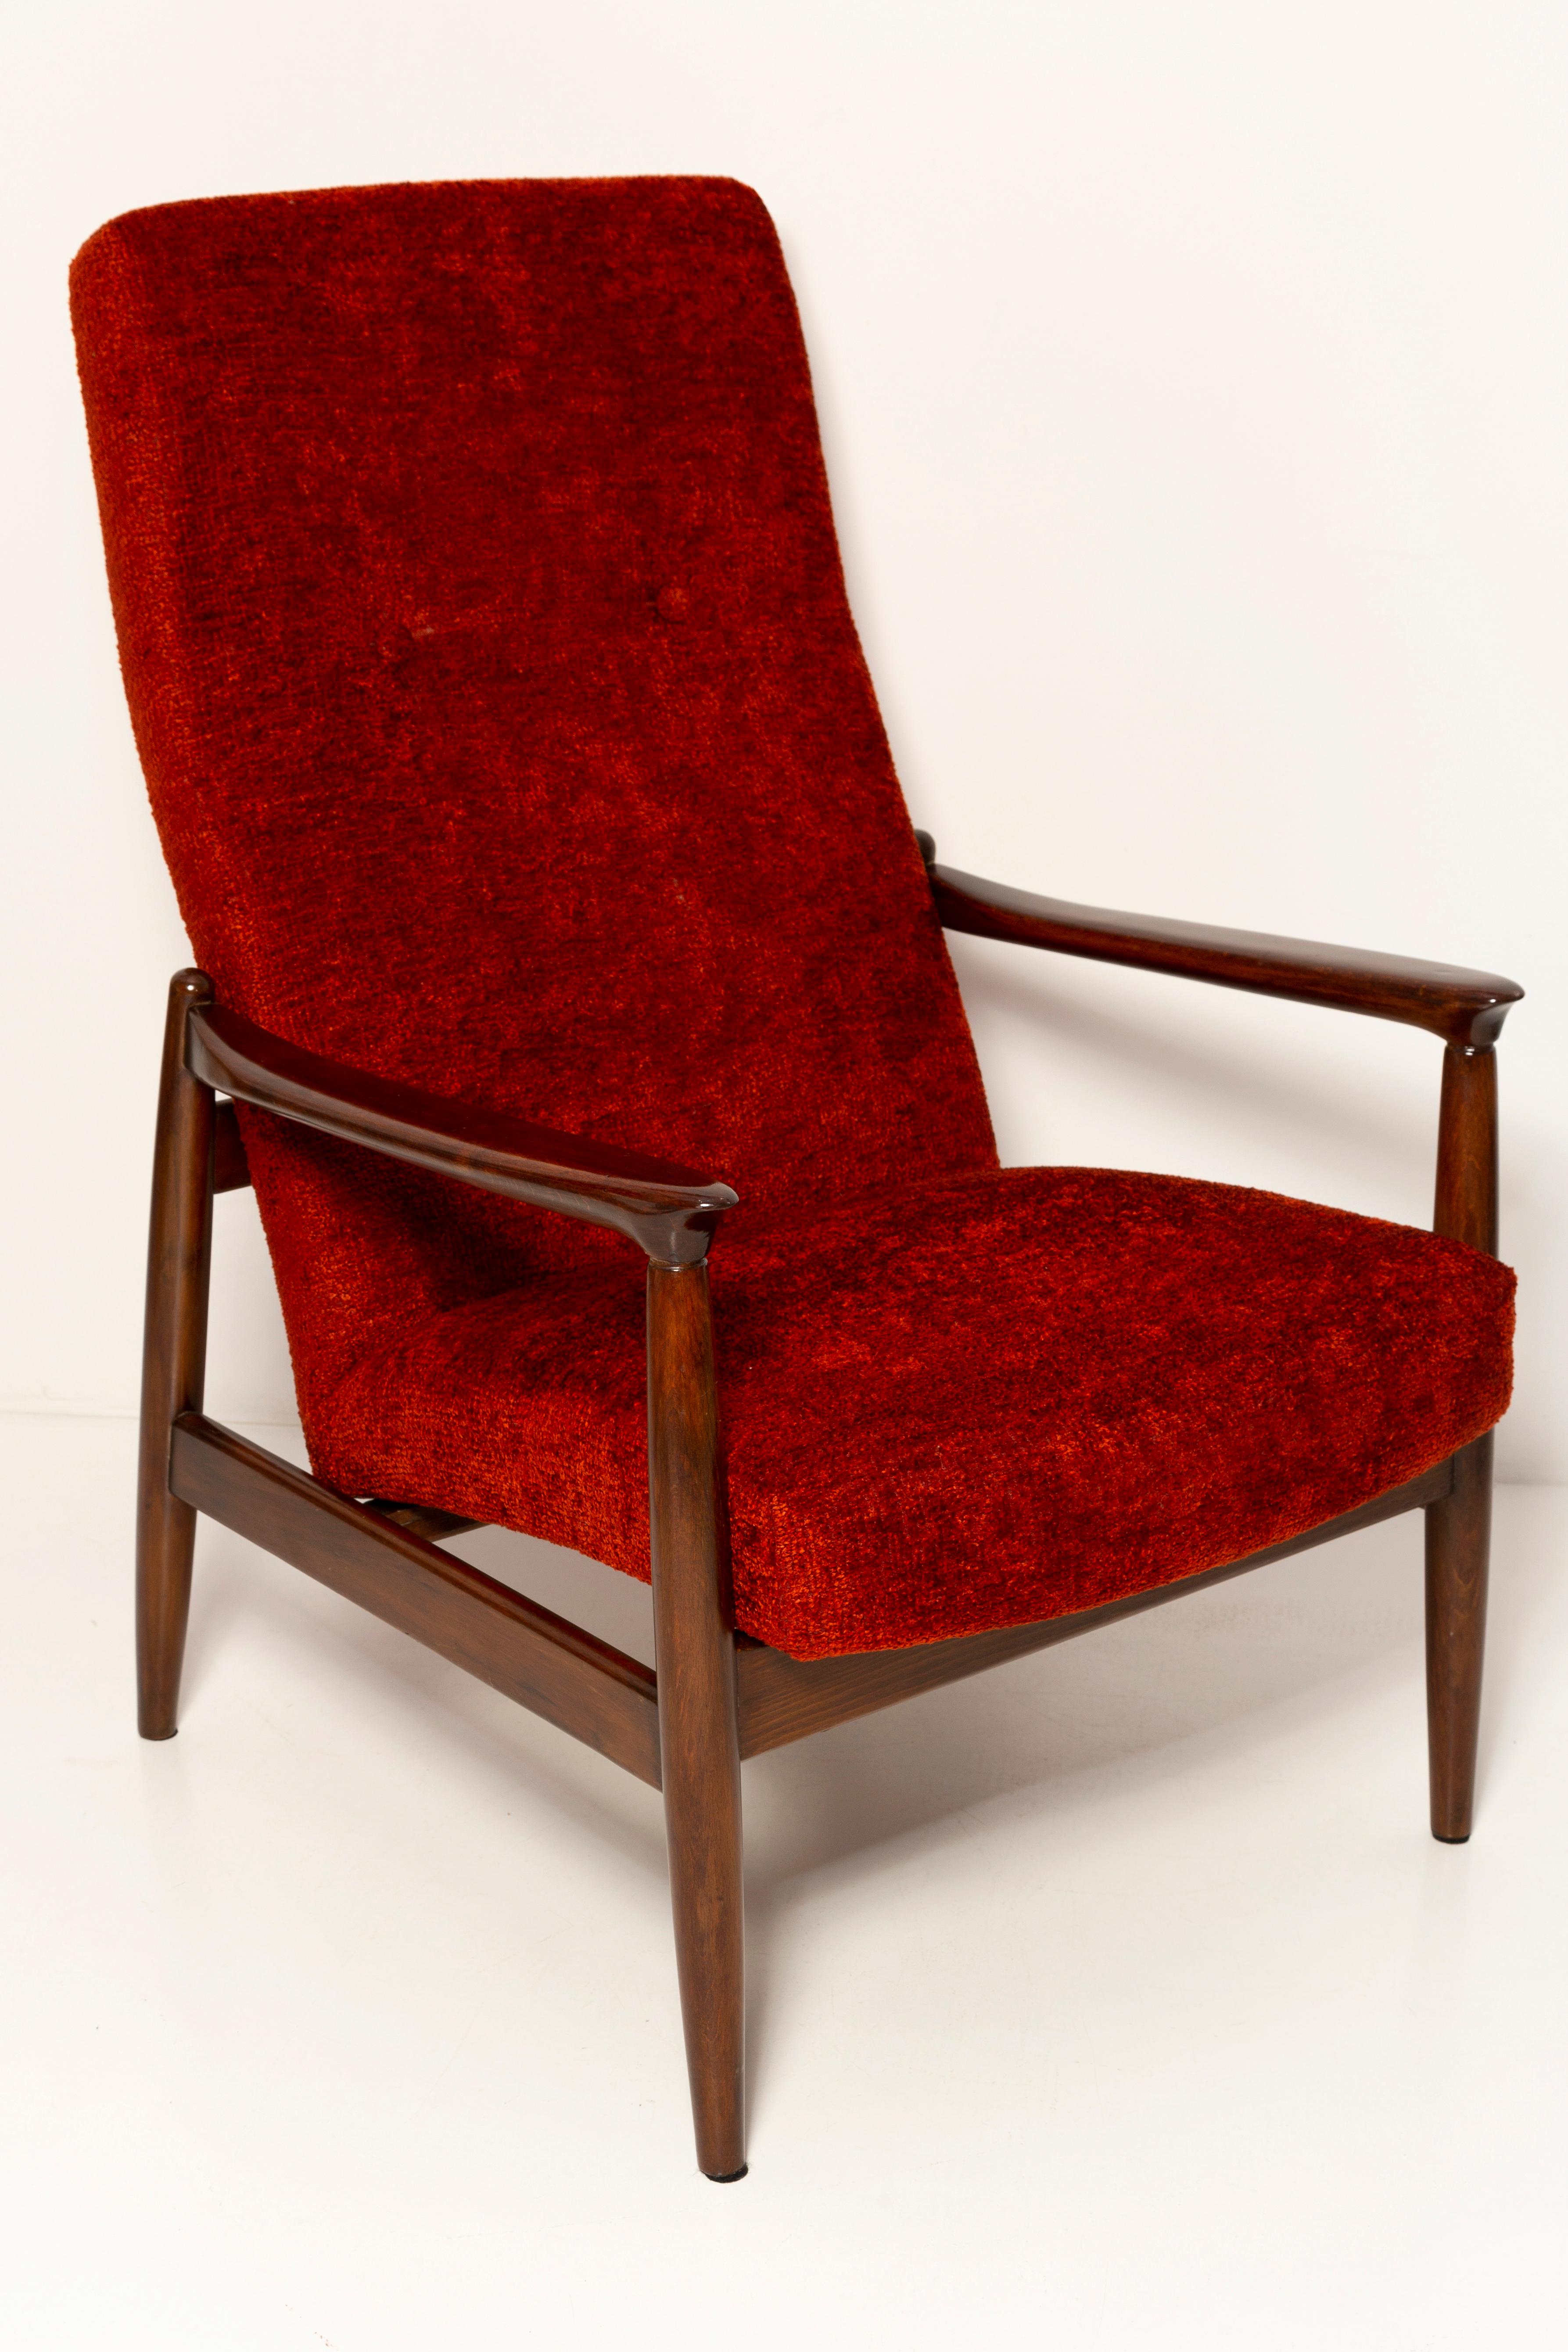 Dark red boucle armchair designed by Edmund Homa, a Polish architect, designer of Industrial Design and interior architecture, professor at the Academy of Fine Arts in Gdansk.

The armchairs were made in the 1960s in the Gosciecinska Furniture